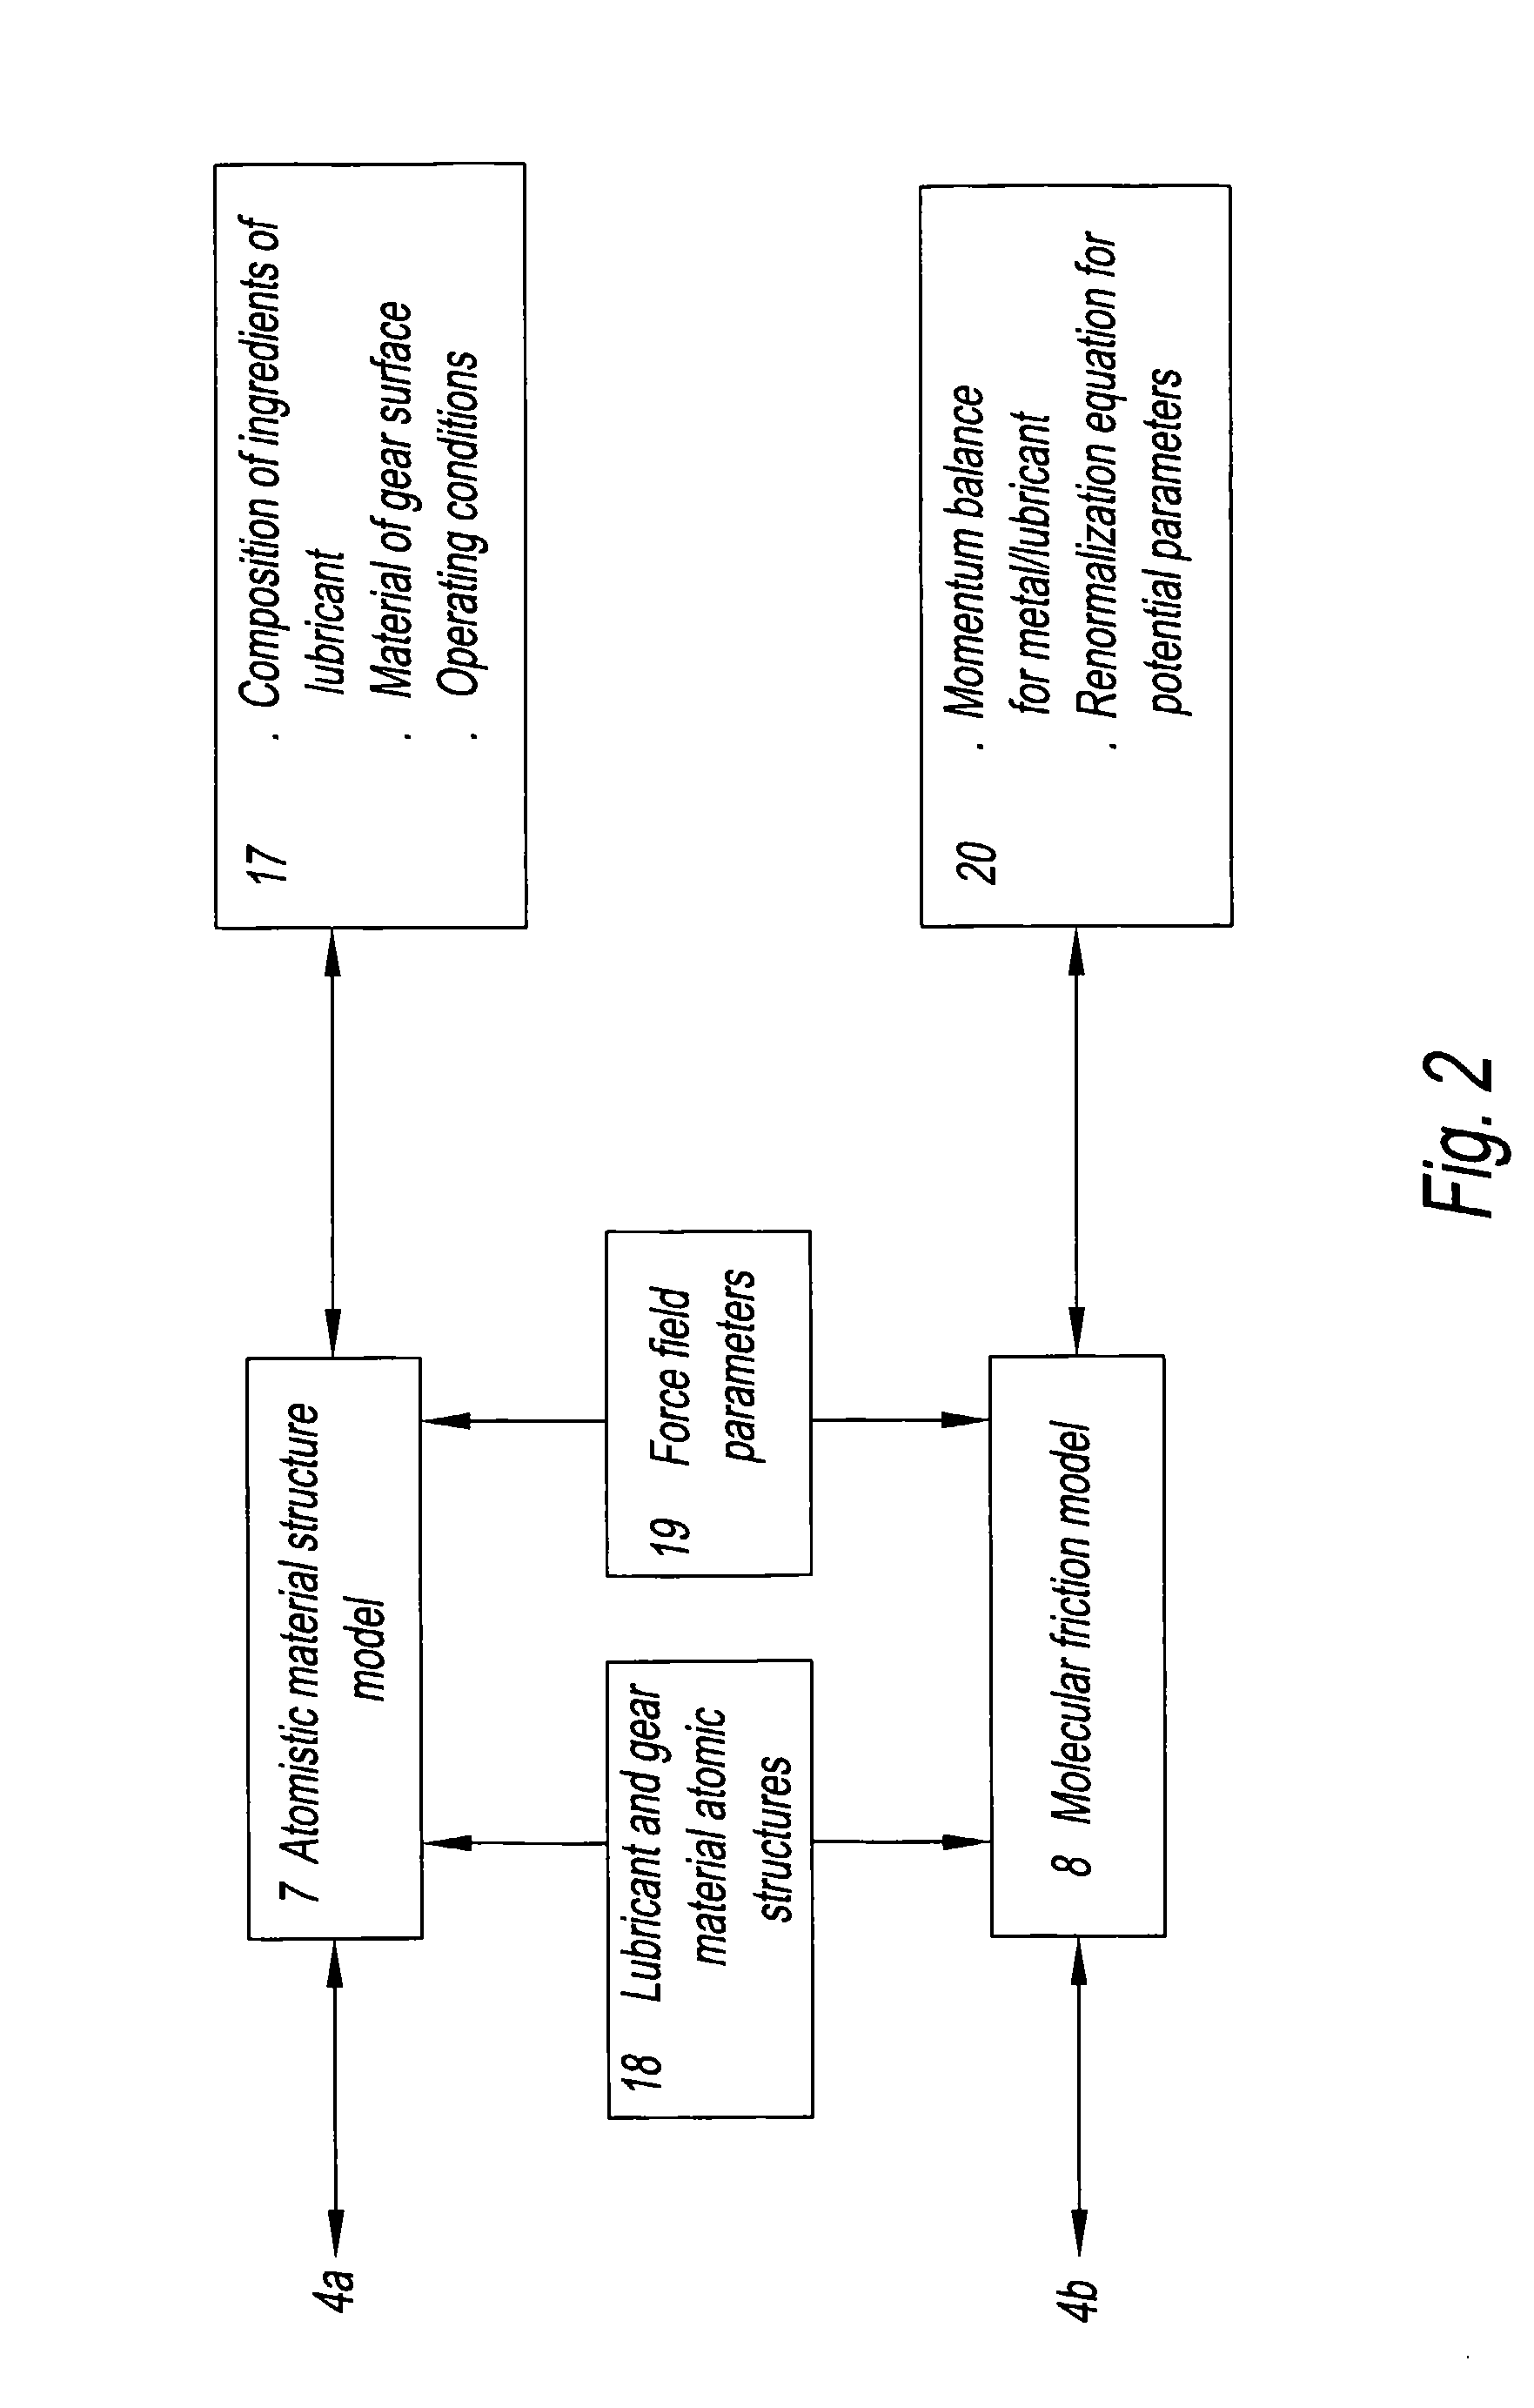 Systems and Methods for Modeling Surface Properties of a Mechanical Component